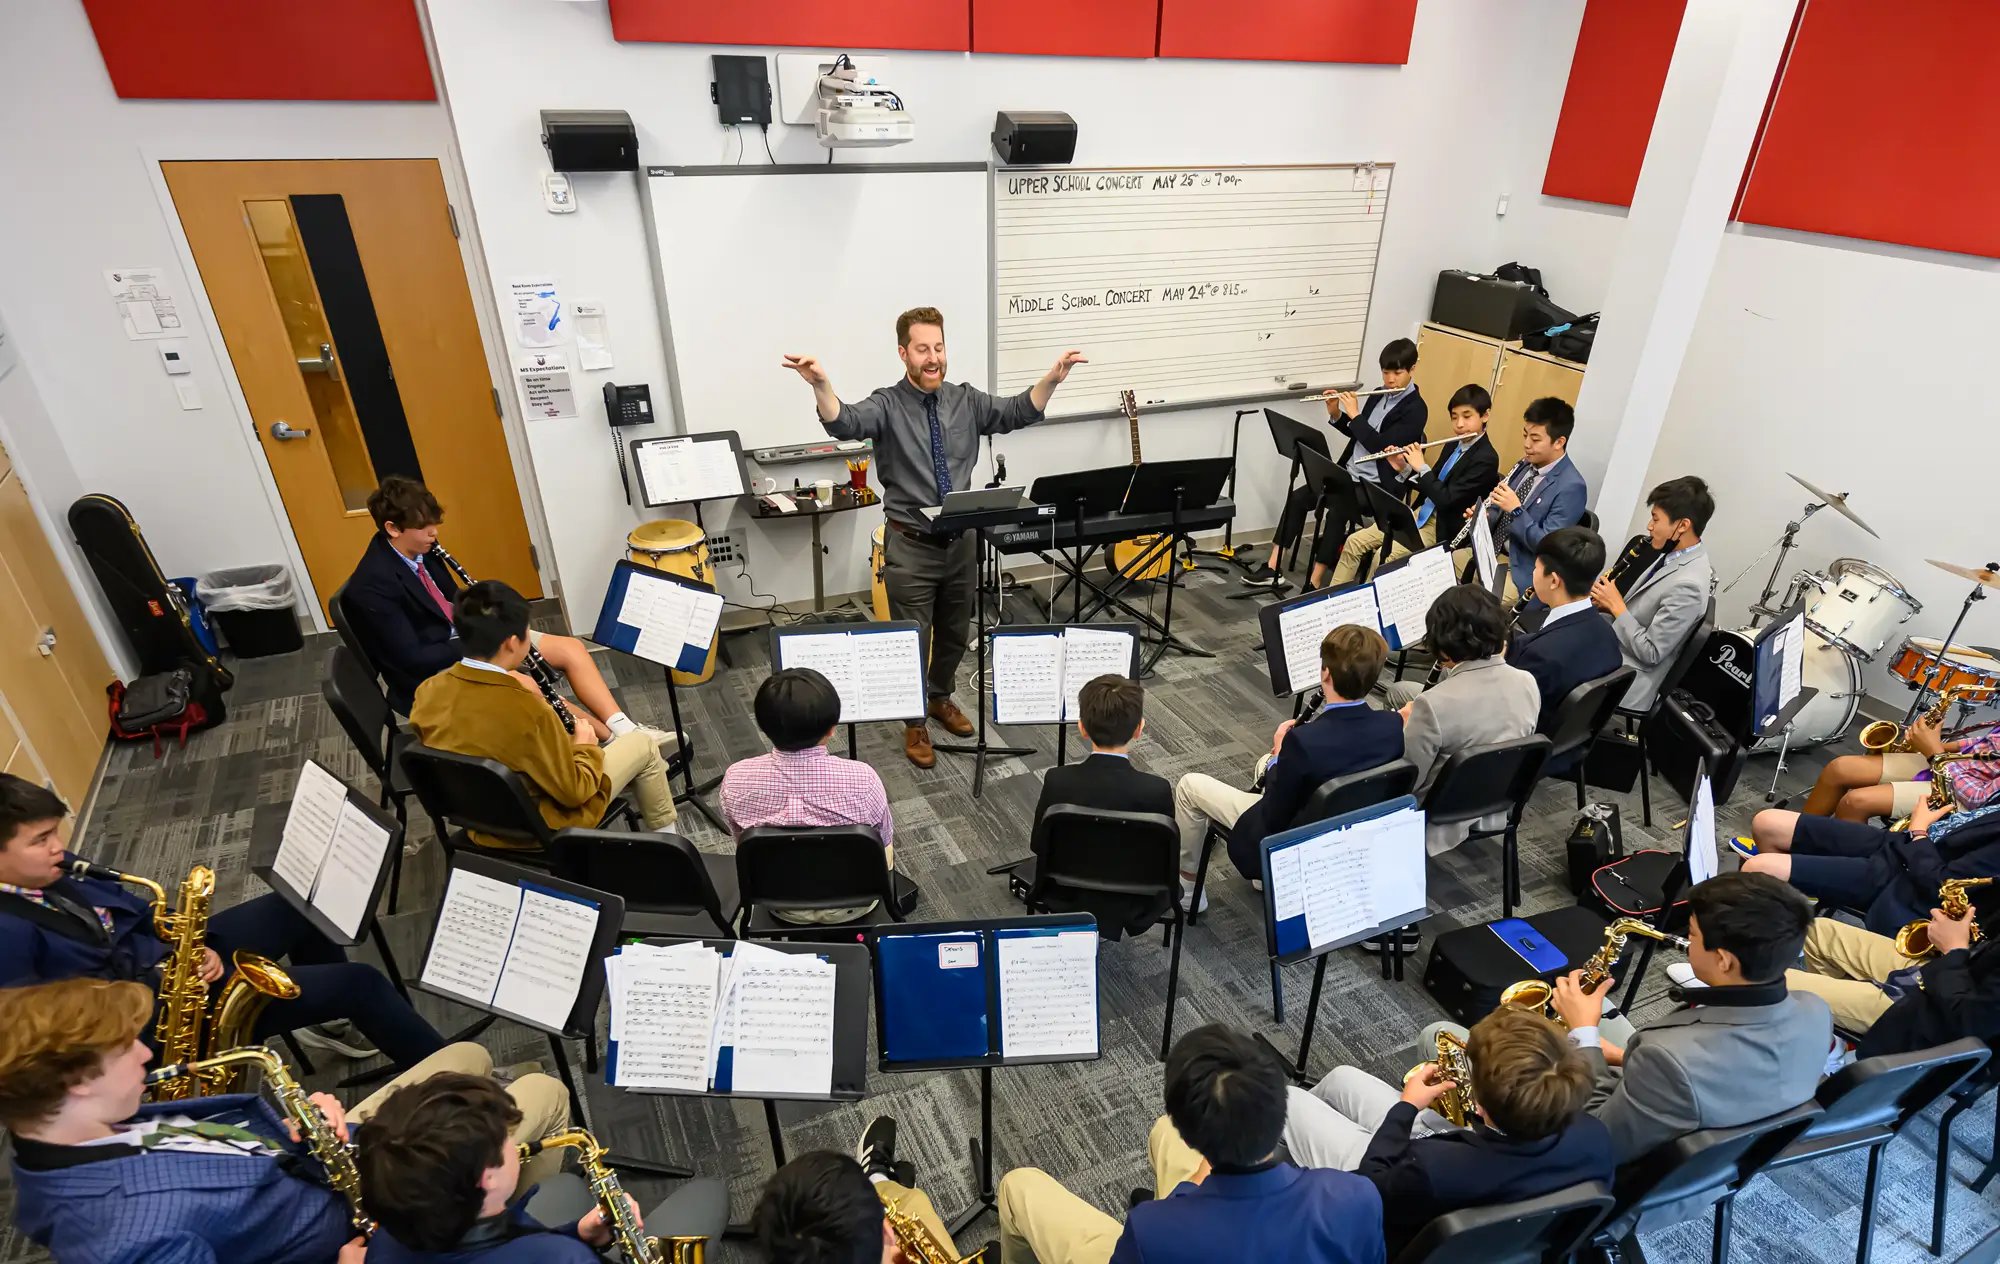 A male conductor leads a small band of middle school students